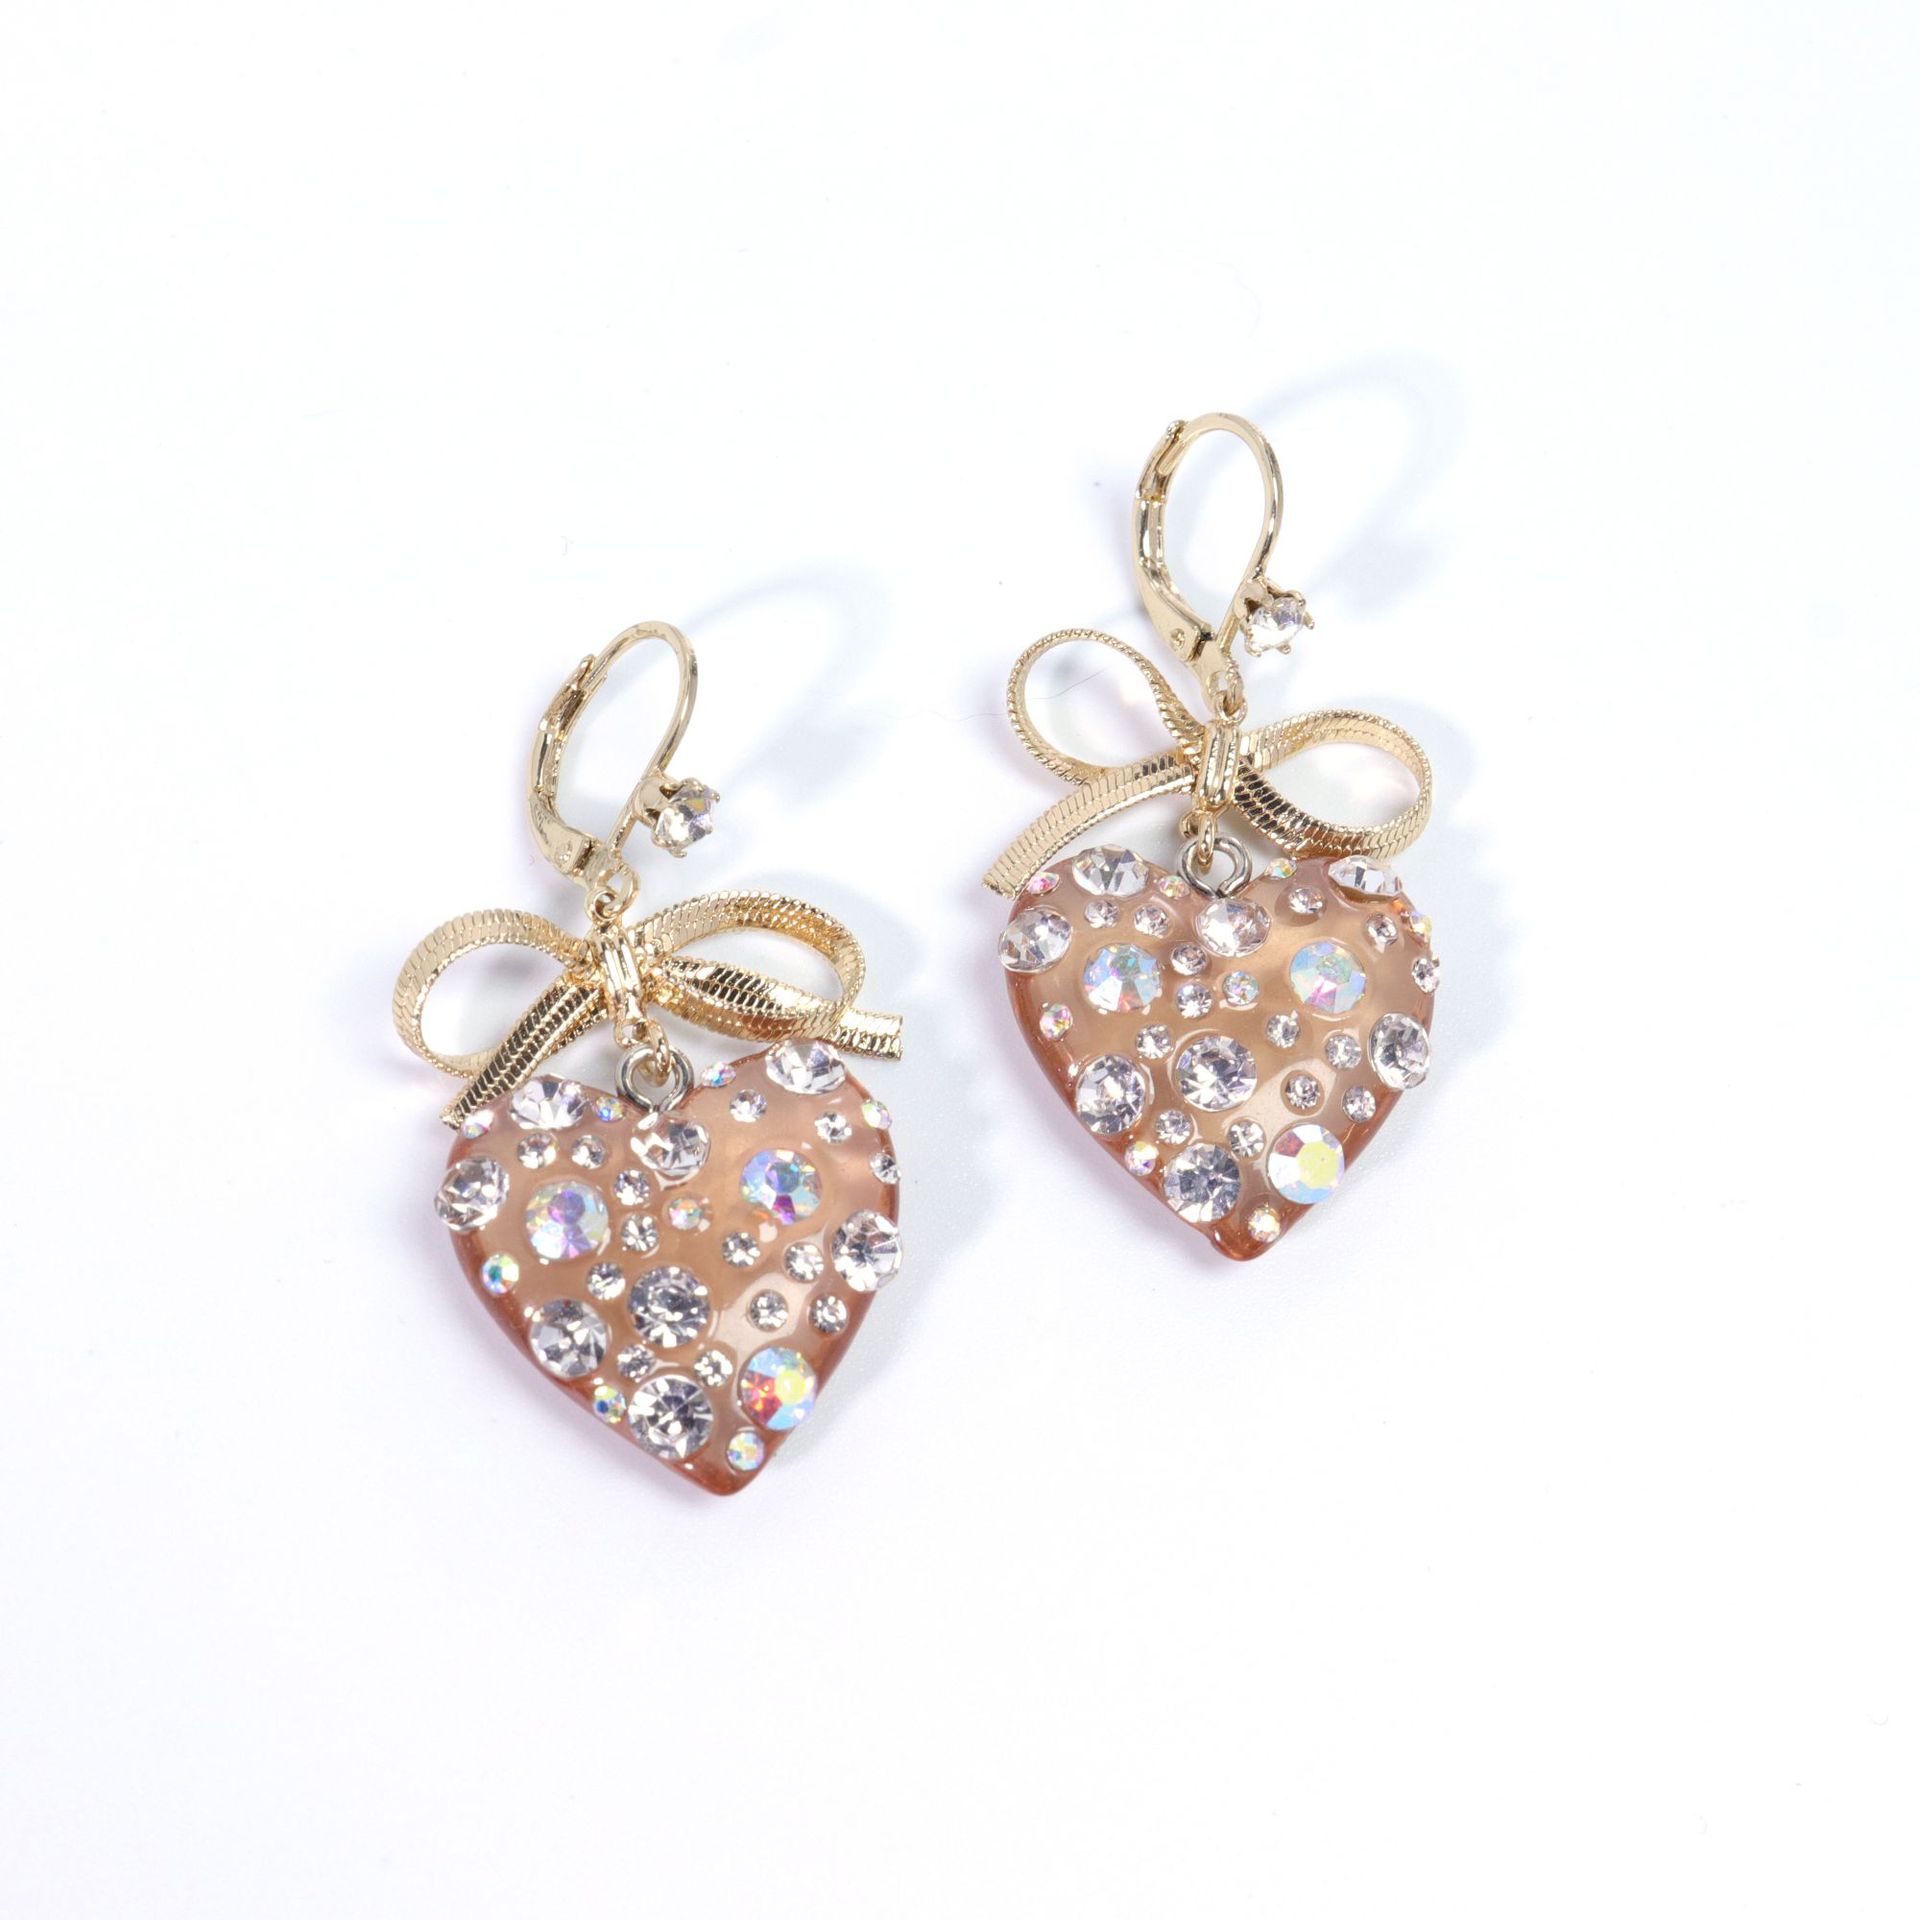 Qingdao foreign trade jewelry love earrings stud earrings fashion flash diamond high set earrings the number of female earrings is not large